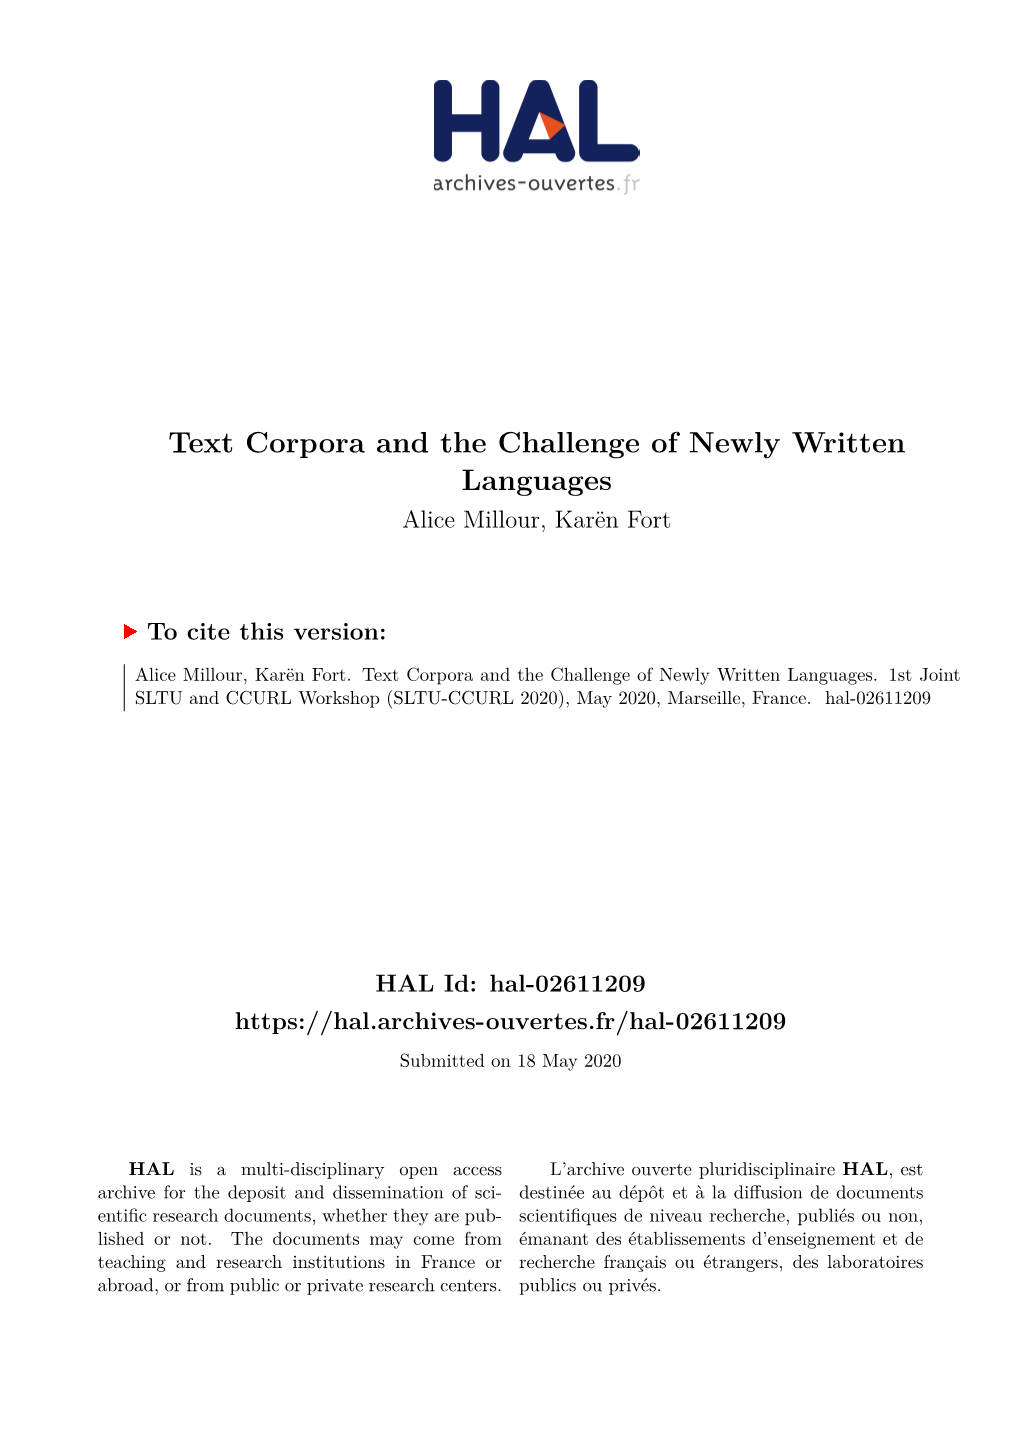 Text Corpora and the Challenge of Newly Written Languages Alice Millour, Karën Fort